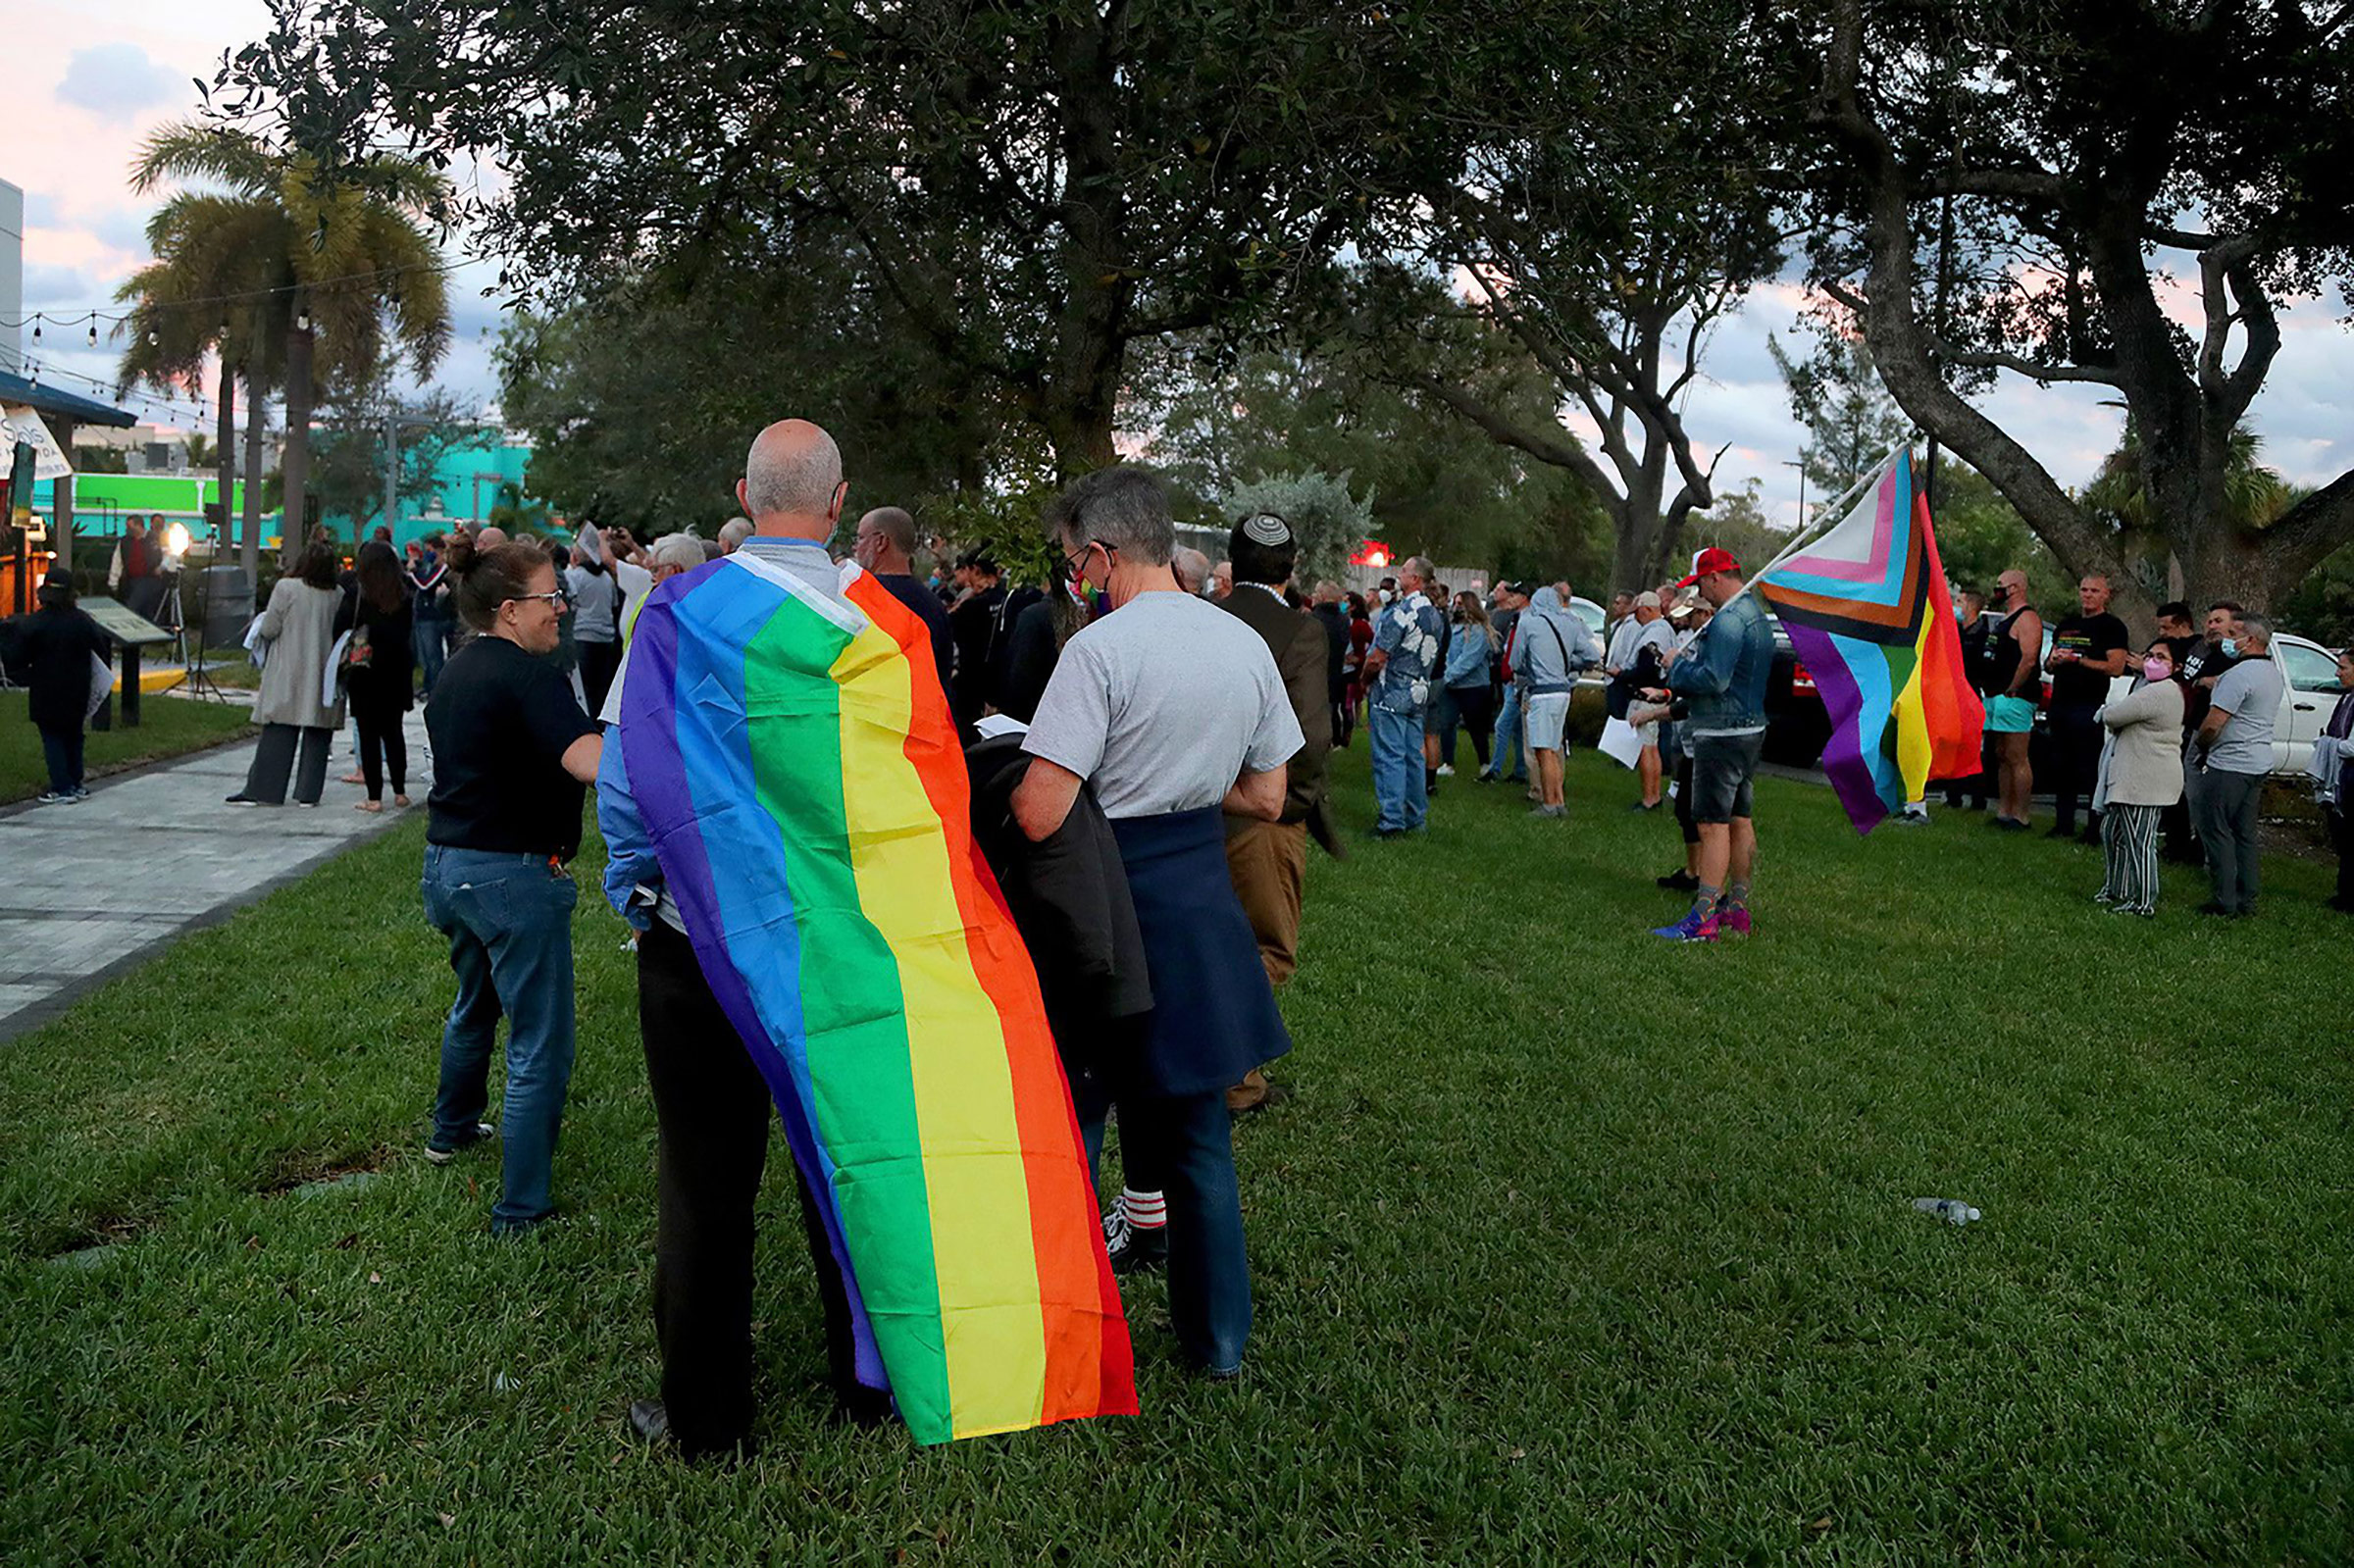 Supporters gather for a Safe Schools South Florida &amp; Friends rally to push back against Florida's so-called "Don't Say Gay" bill at the Pride Center in Wilton Manors, Fla. on Feb. 2, 2022. (Mike Stocker—Sun Sentinel/Tribune News Service/Getty Images)